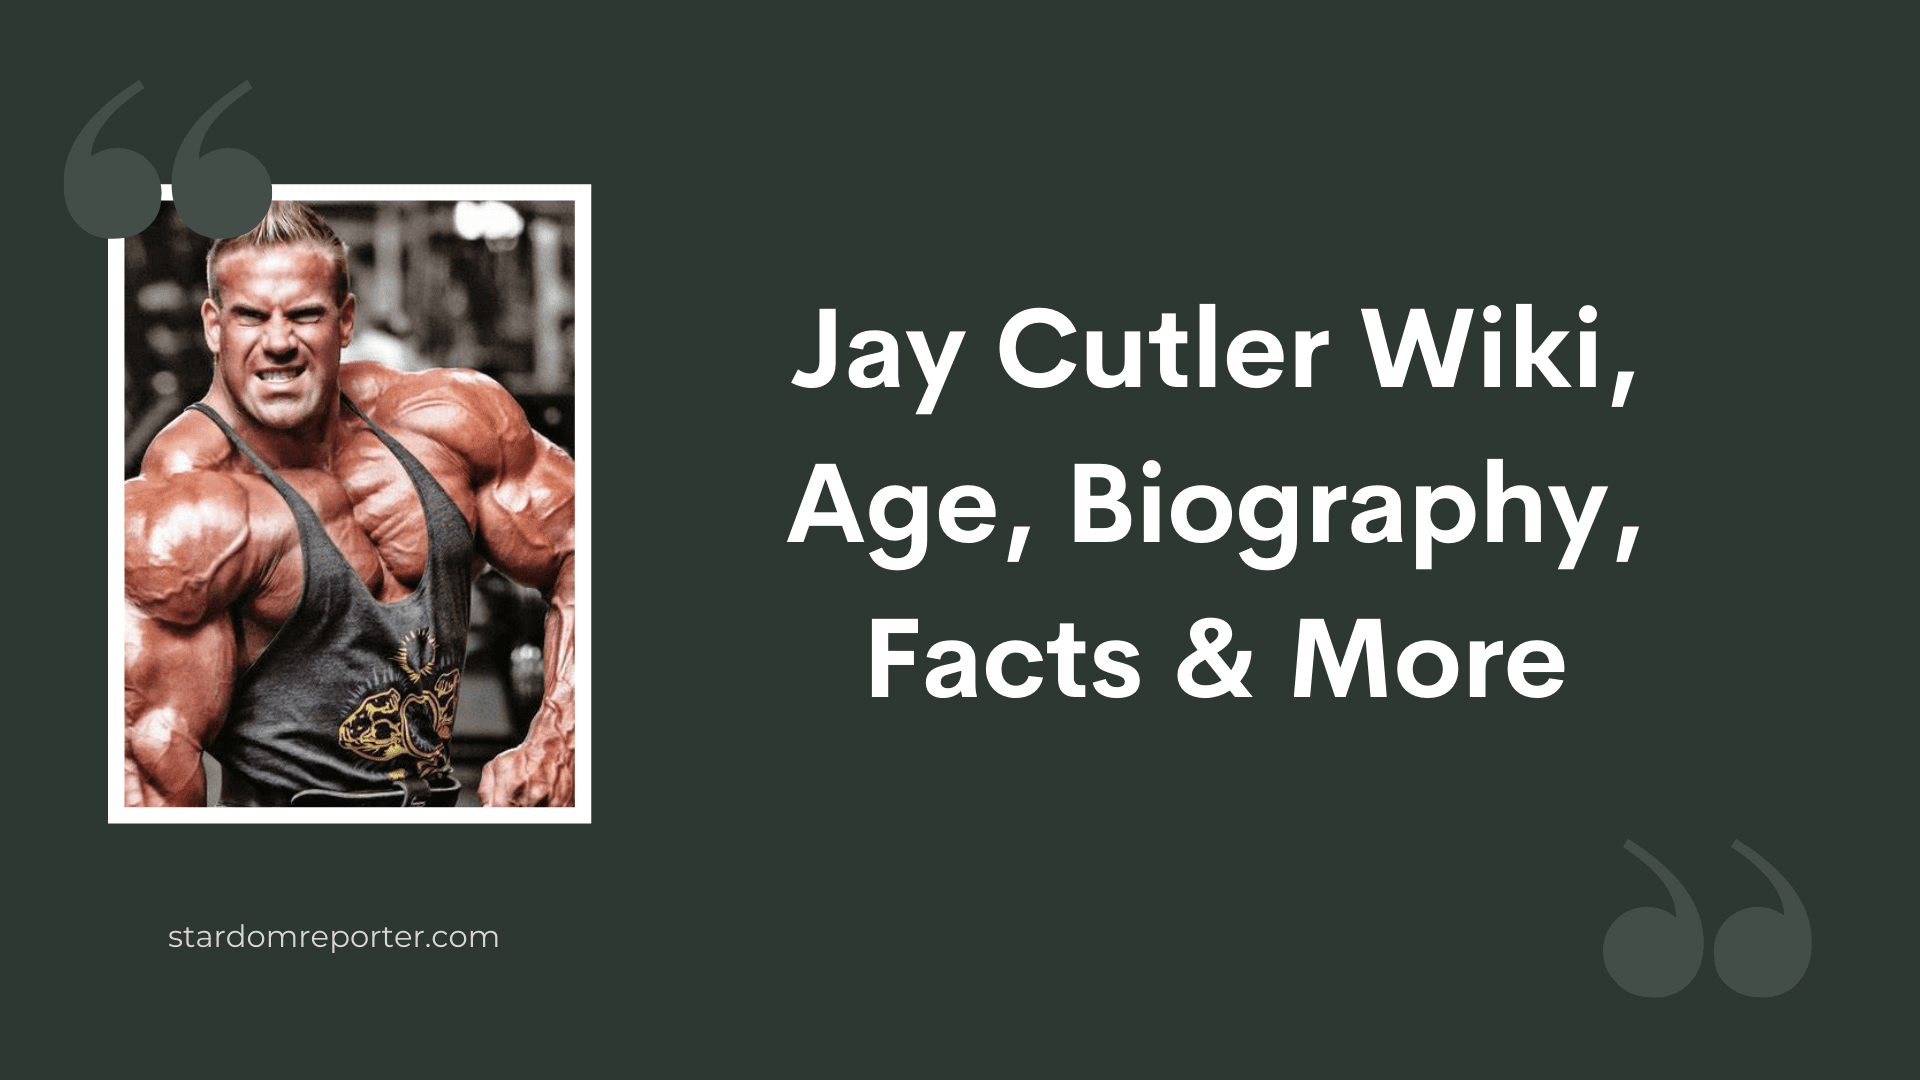 Jay Cutler Wiki, Age, Biography, Net Worth, Facts & More - 31